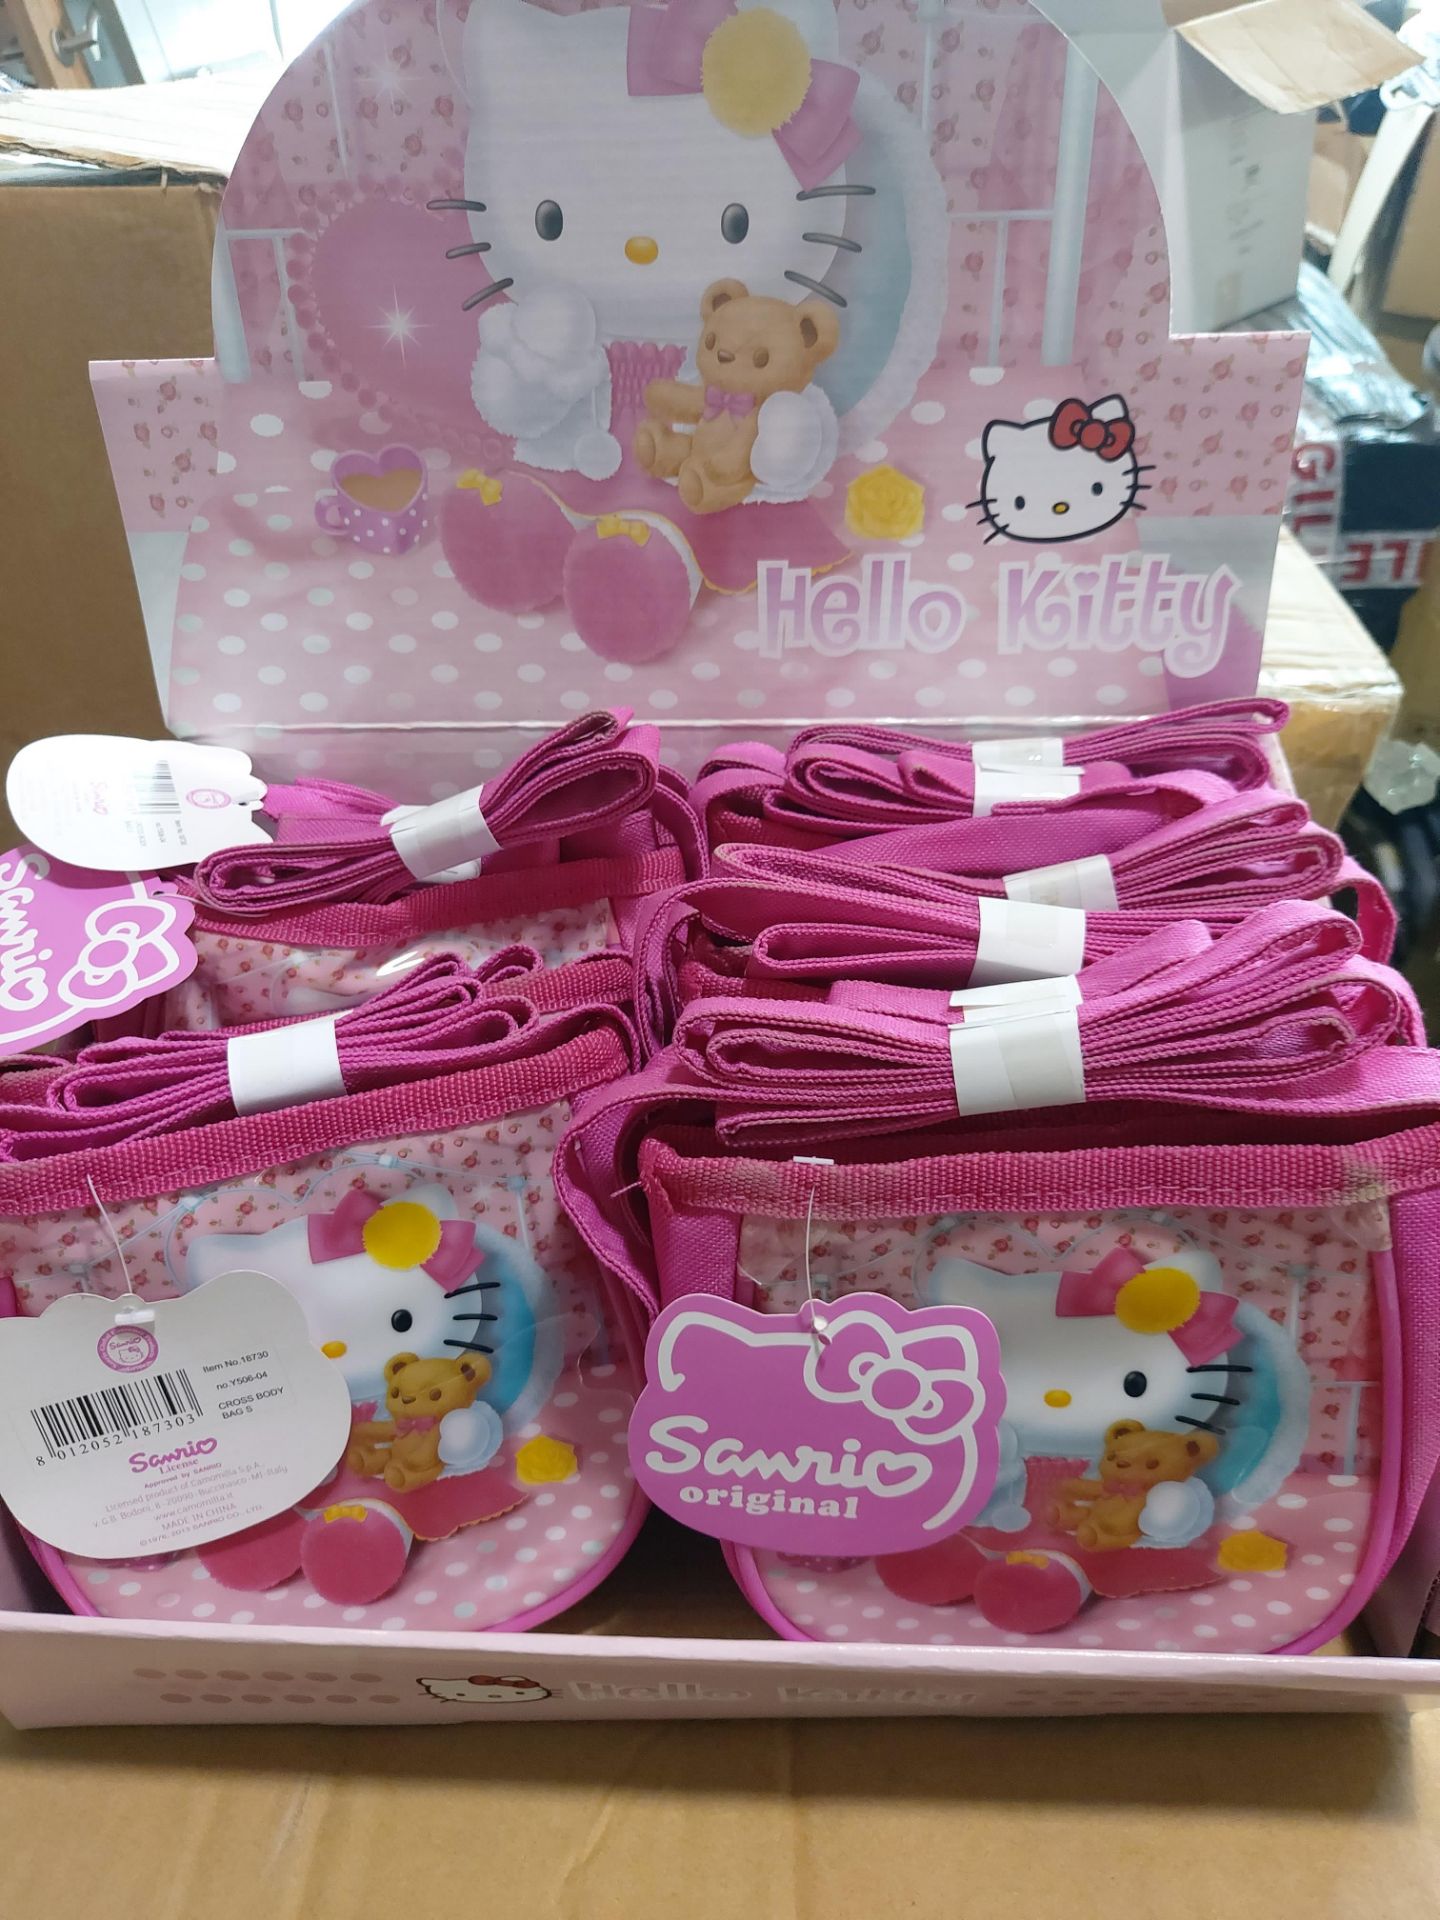 50 X Hello Kitty Shoulder Bag In Retail Display Unit Brand New And Sealed Rrp £4.99